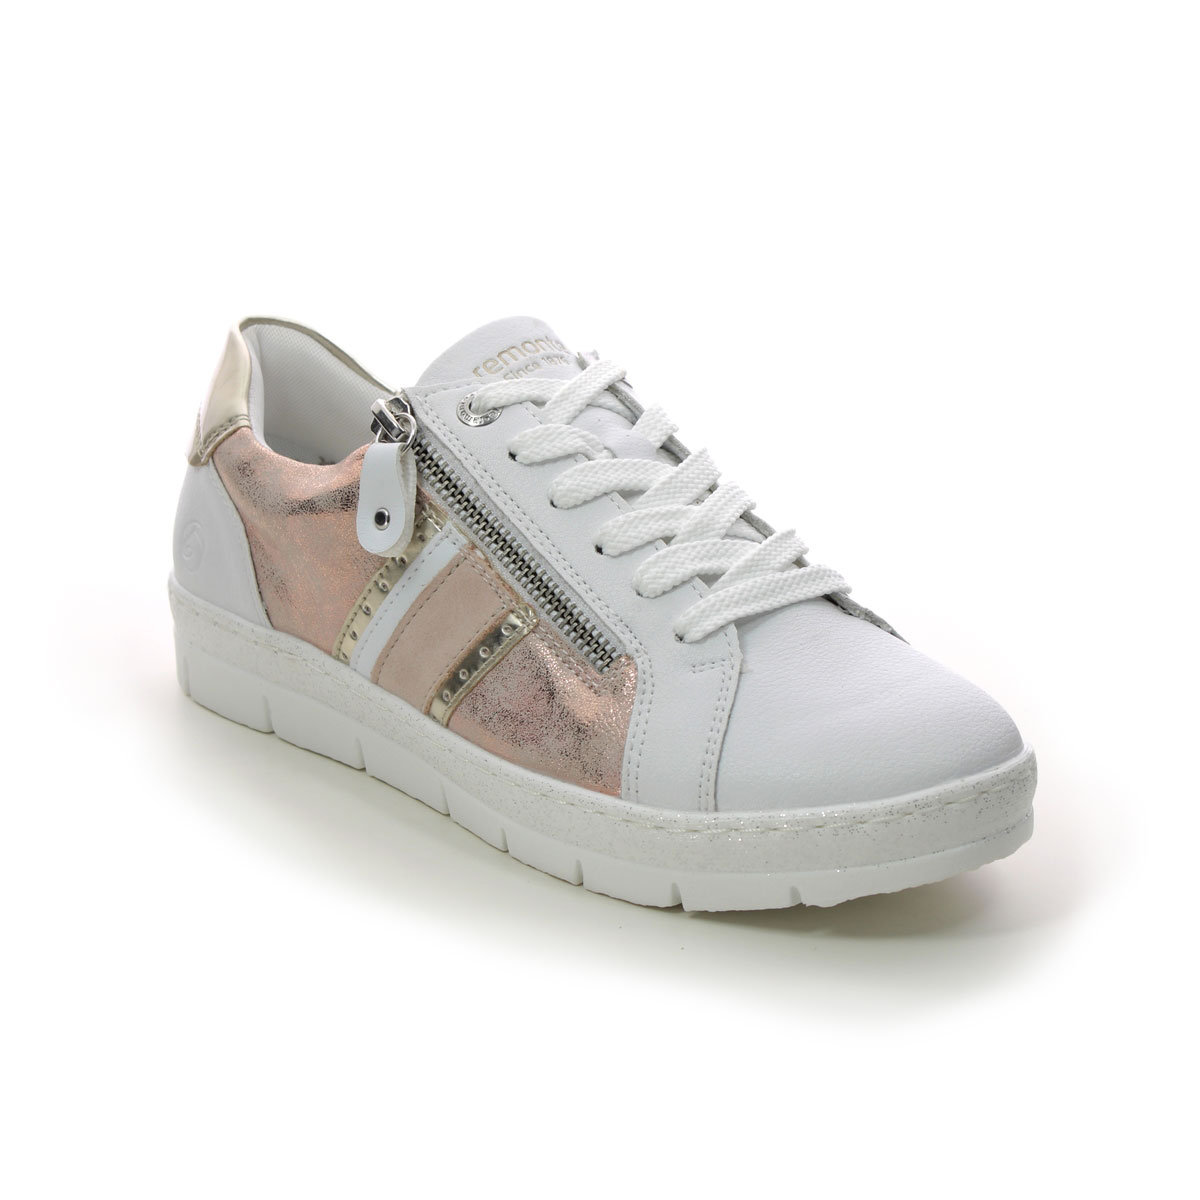 Remonte Ravenna 11 White Rose Gold Womens Trainers D5827-90 In Size 38 In Plain White Rose Gold